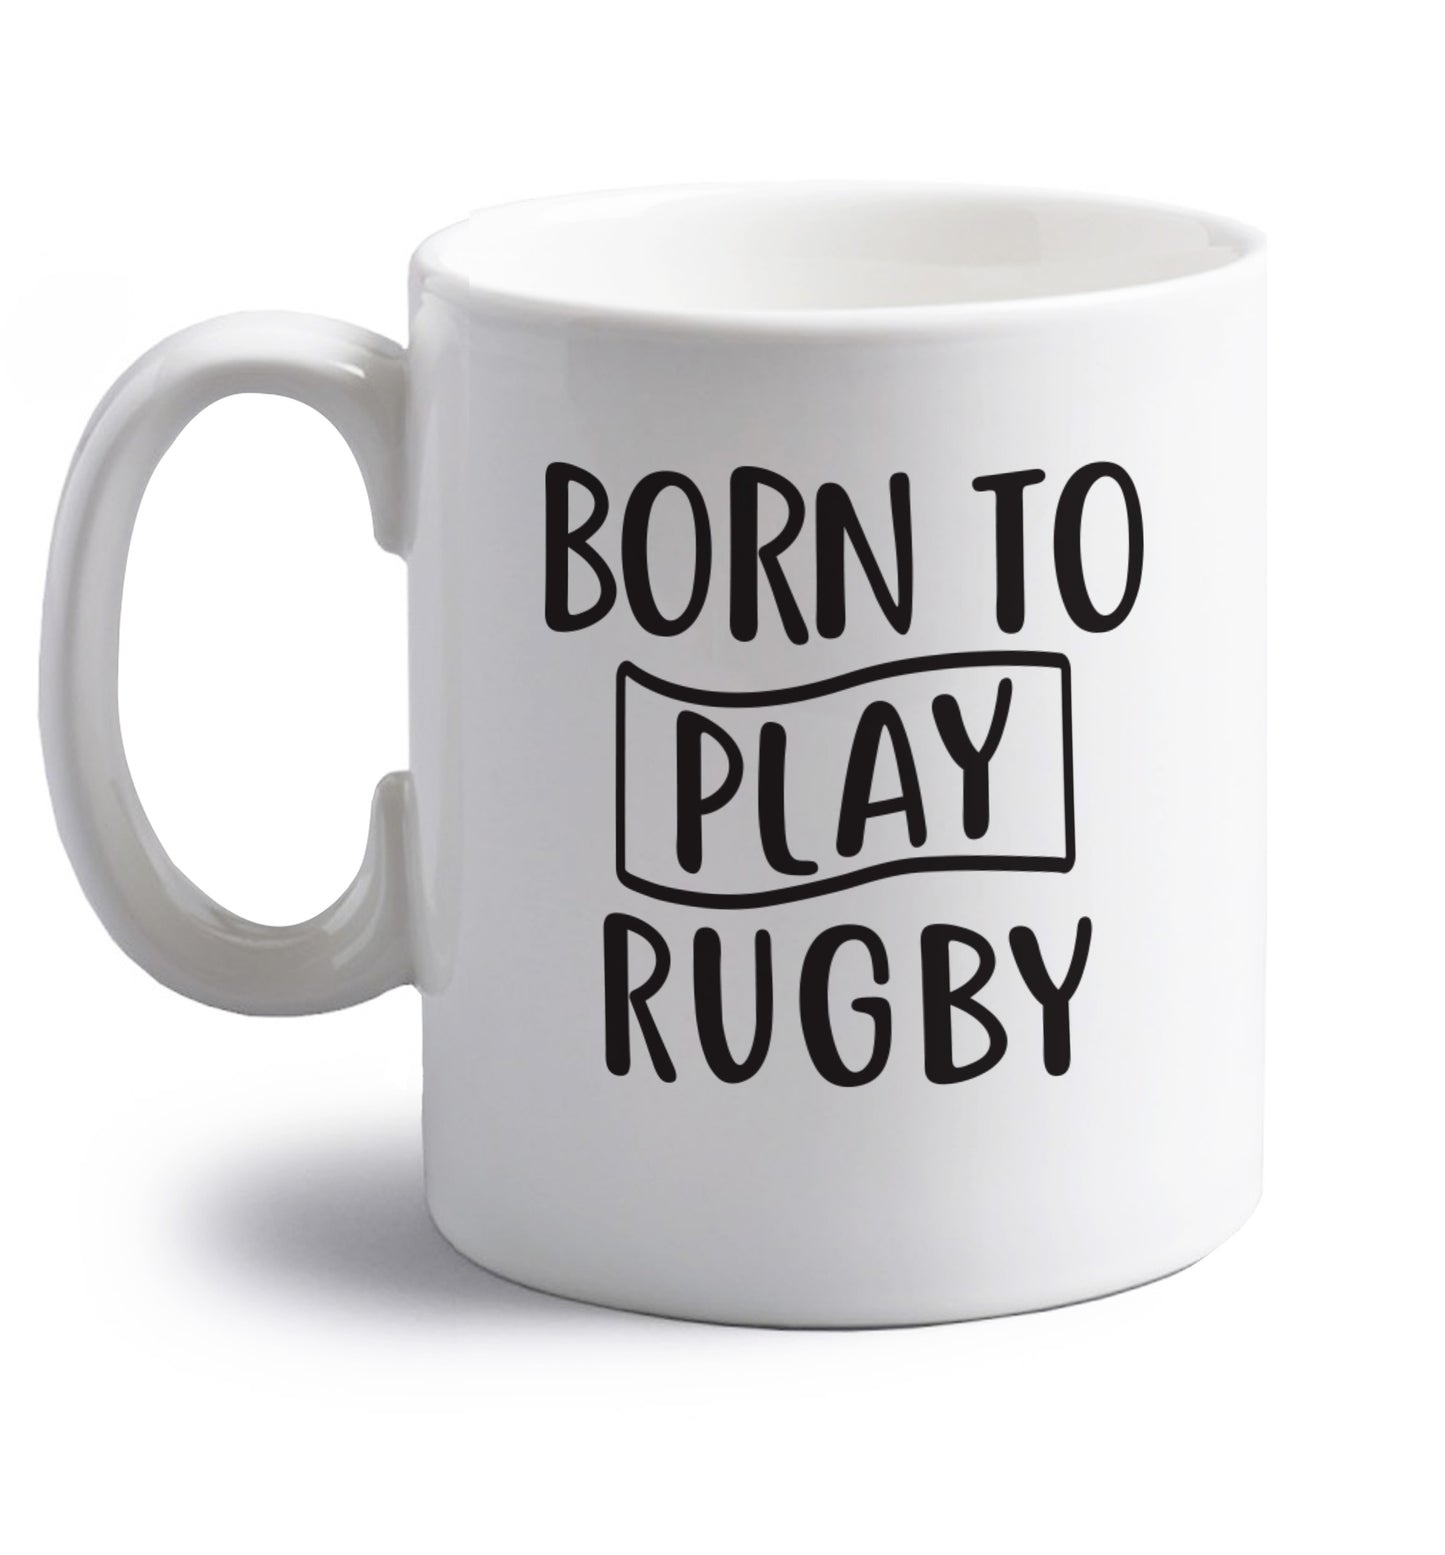 Born to play rugby right handed white ceramic mug 